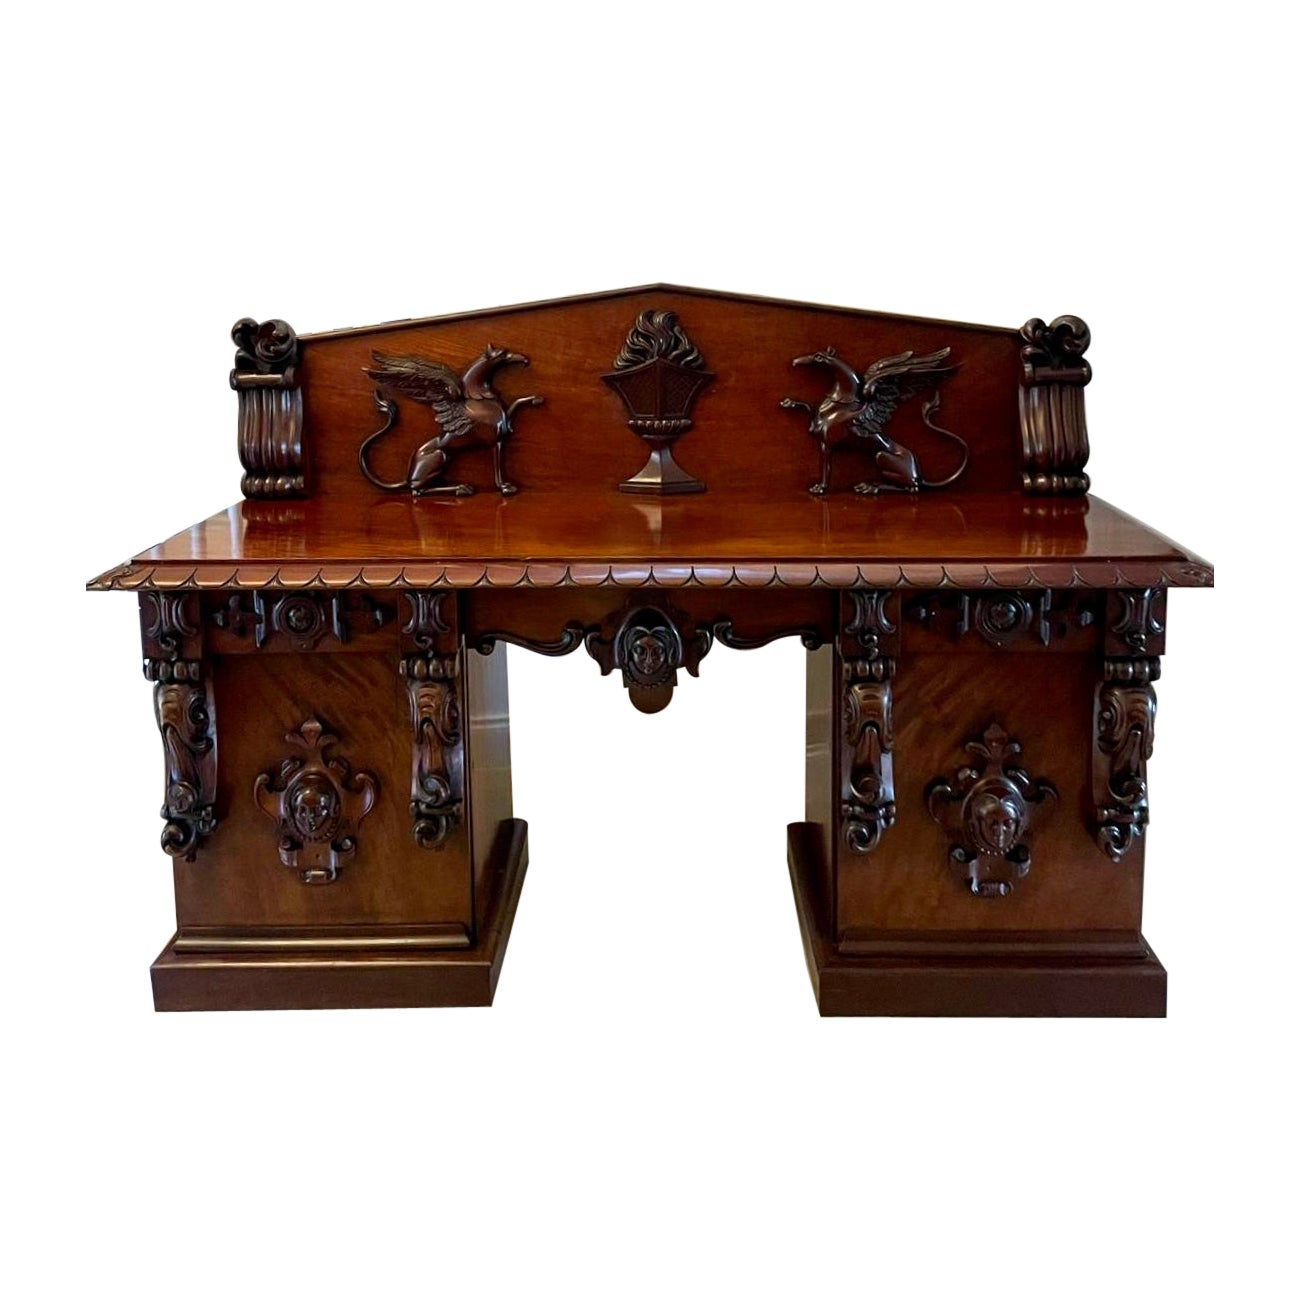 Magnificent Quality Antique William iv Carved Mahogany Sideboard